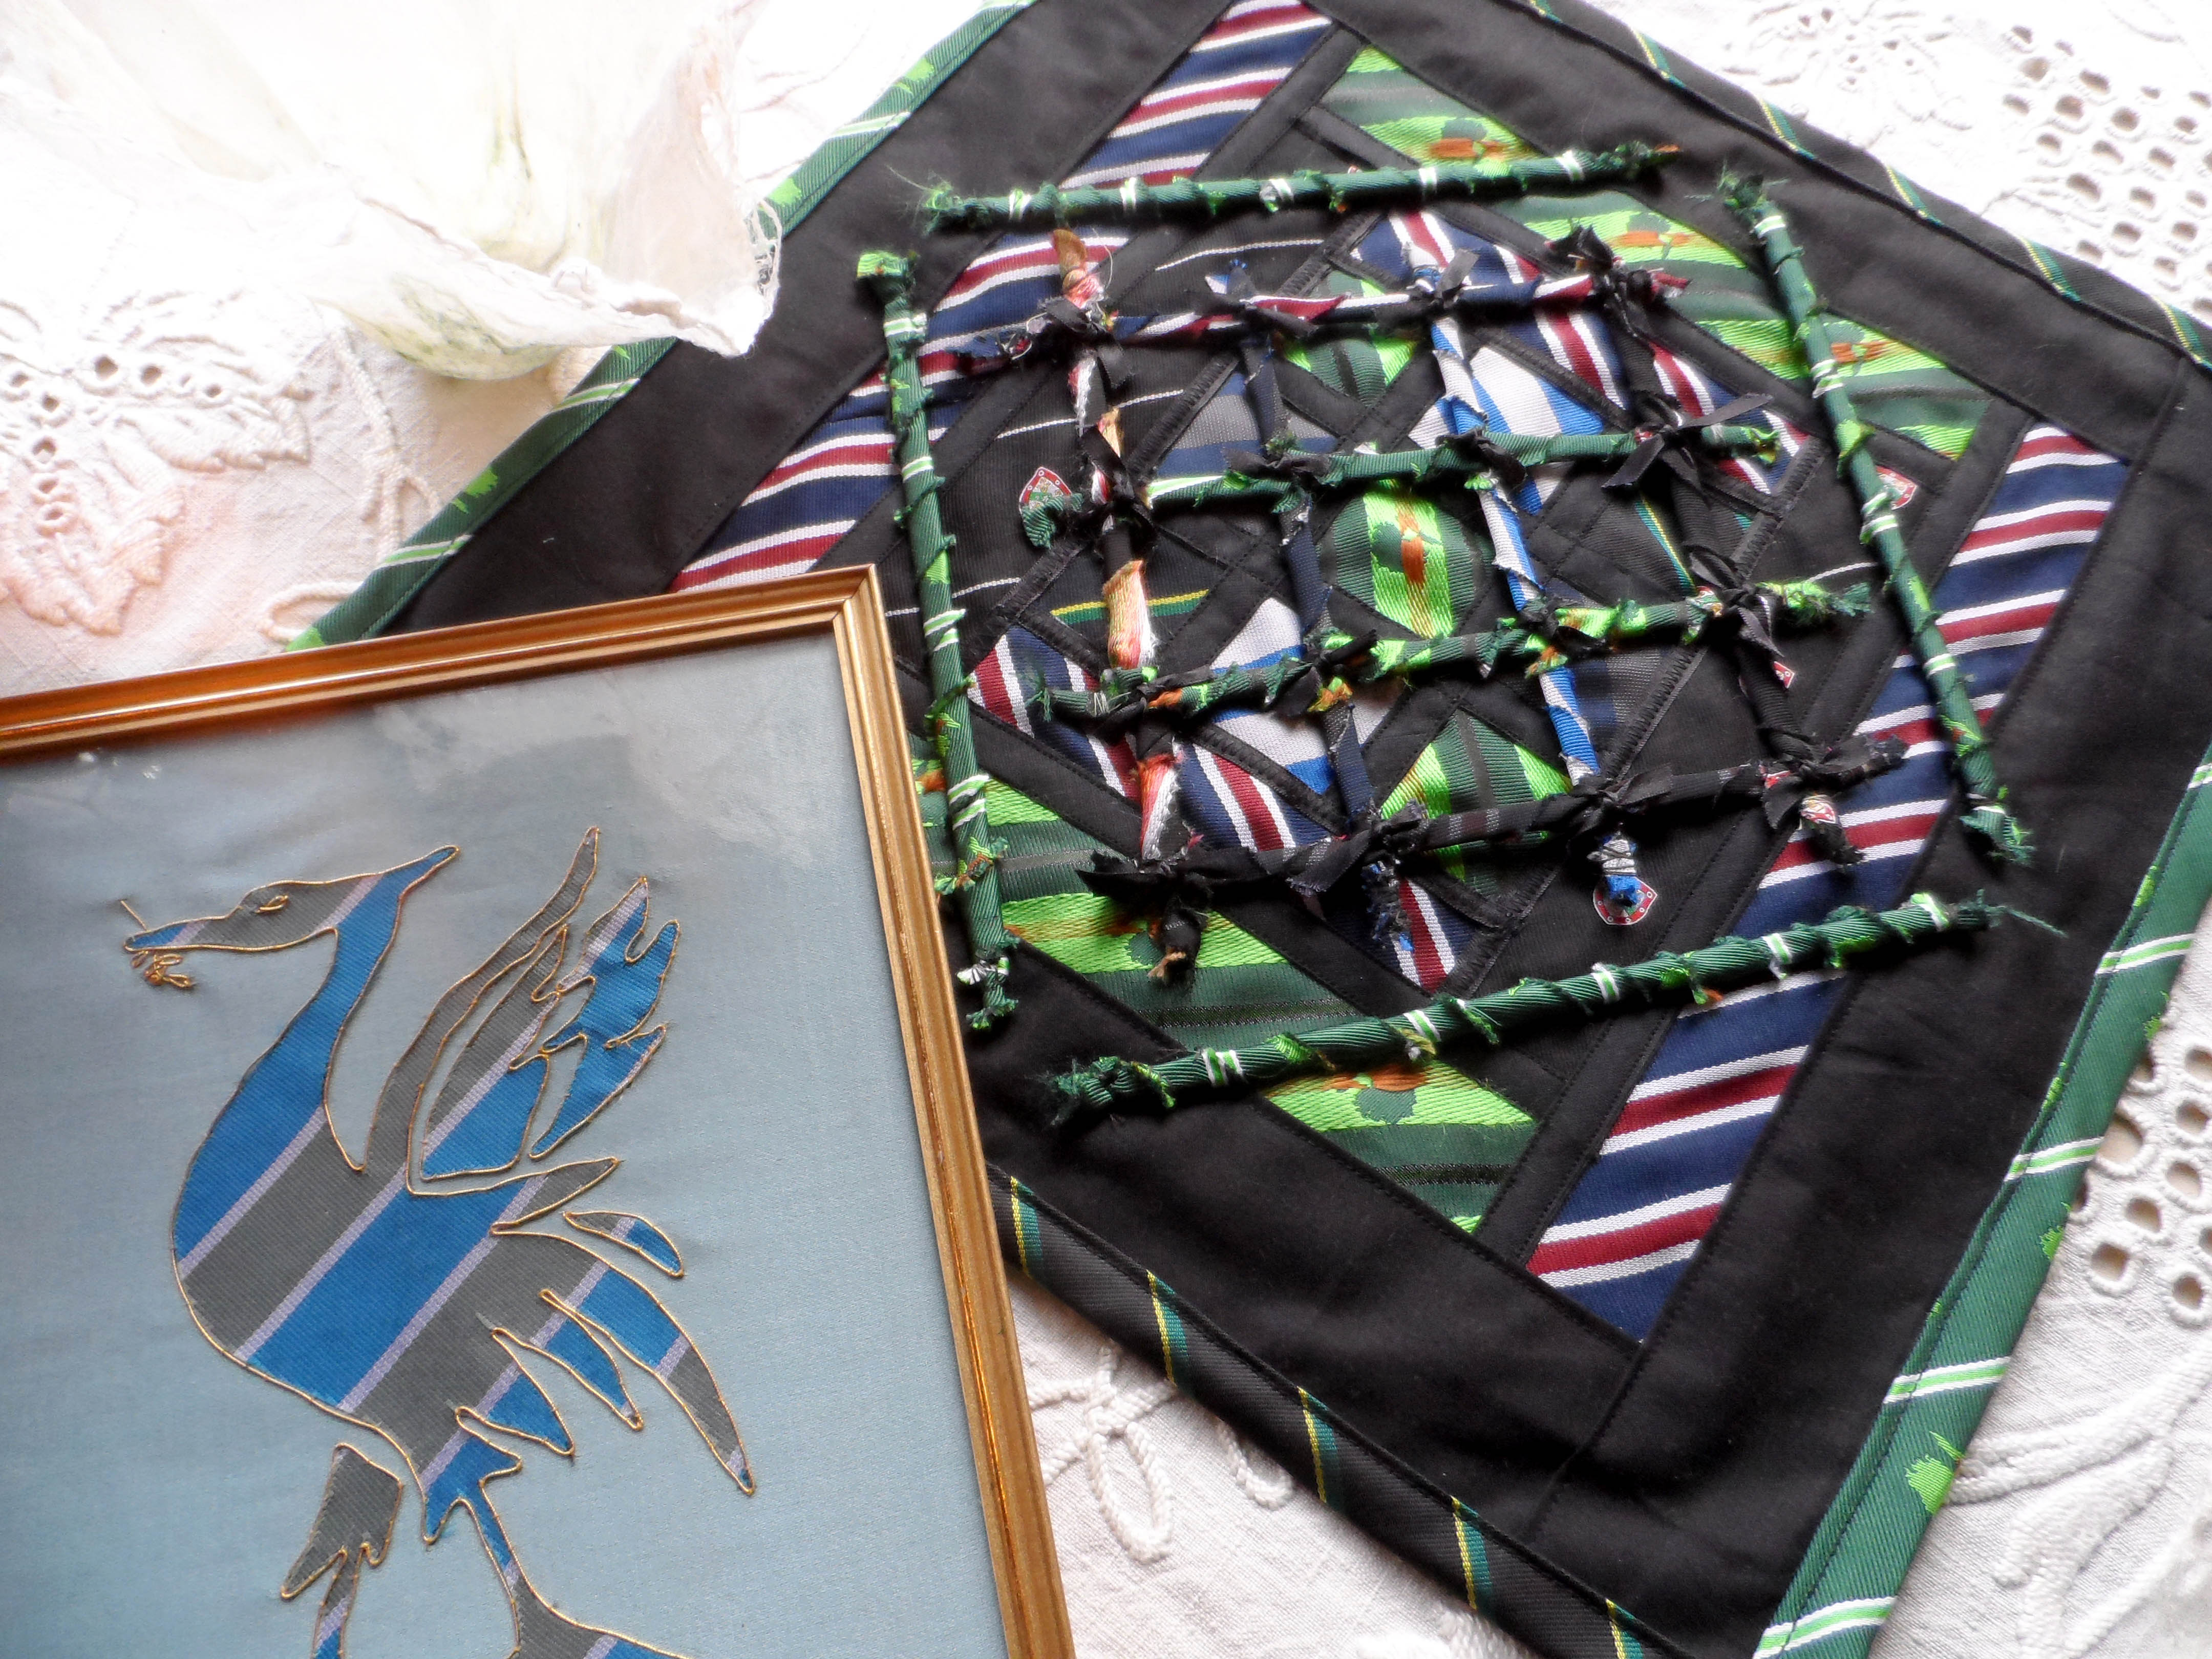 two entries made from old school ties for our forthcoming Tie Challenge